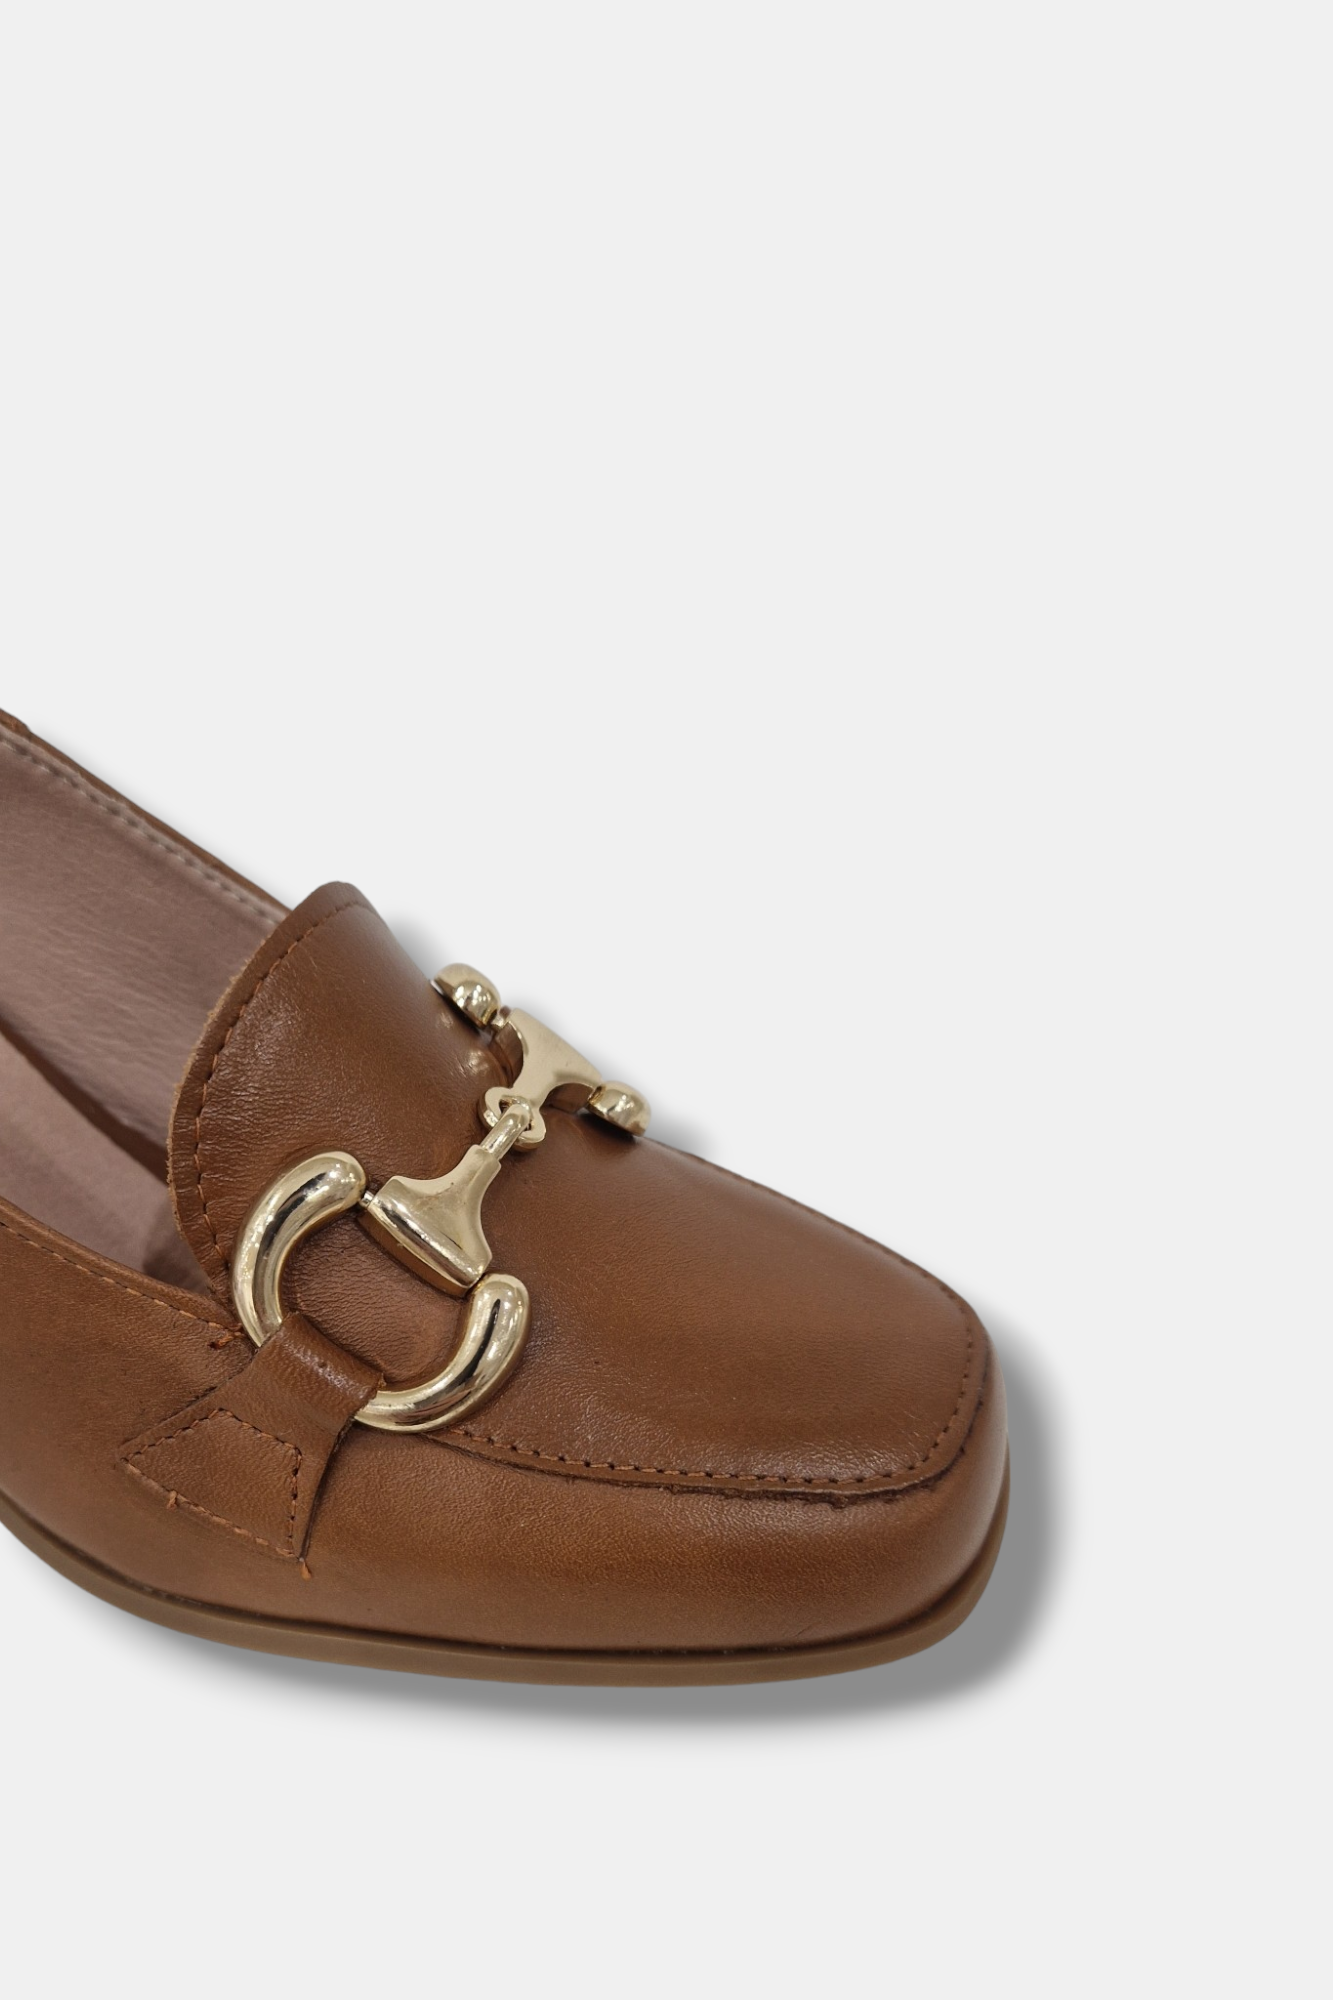 PITILLOS 5793 TAN LEATHER HEELED LOAFER